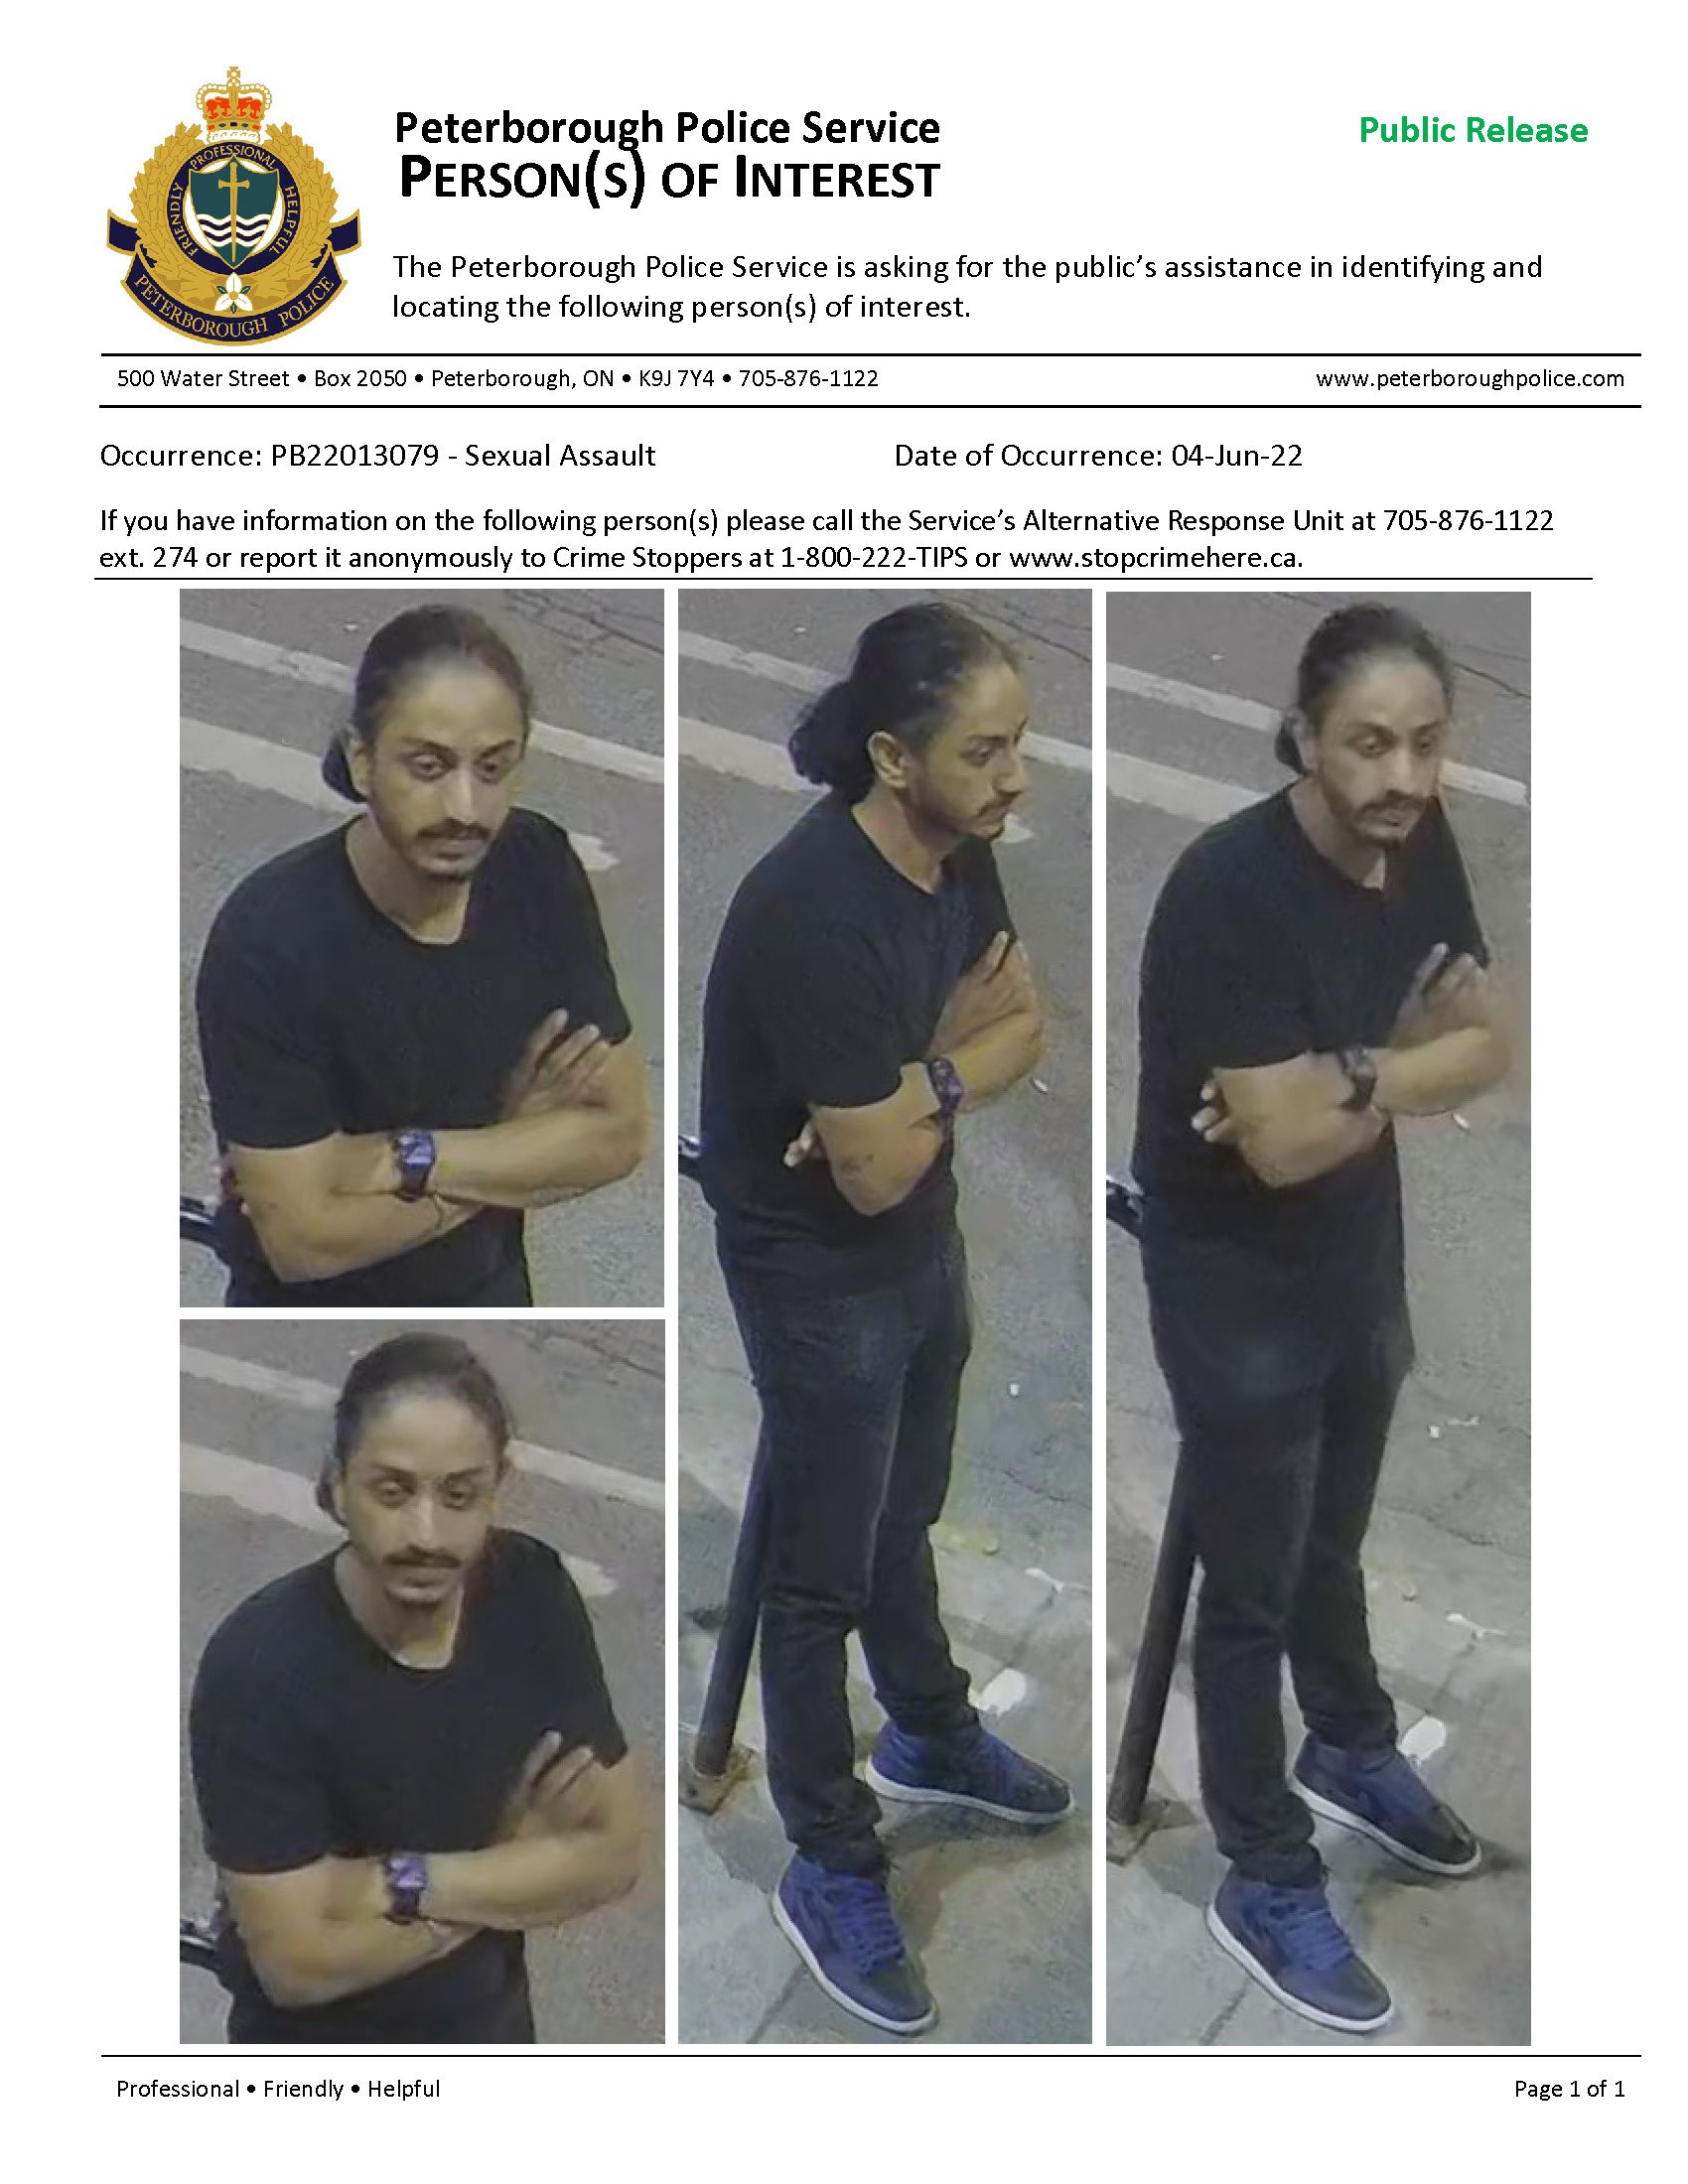 persons of interest public release document